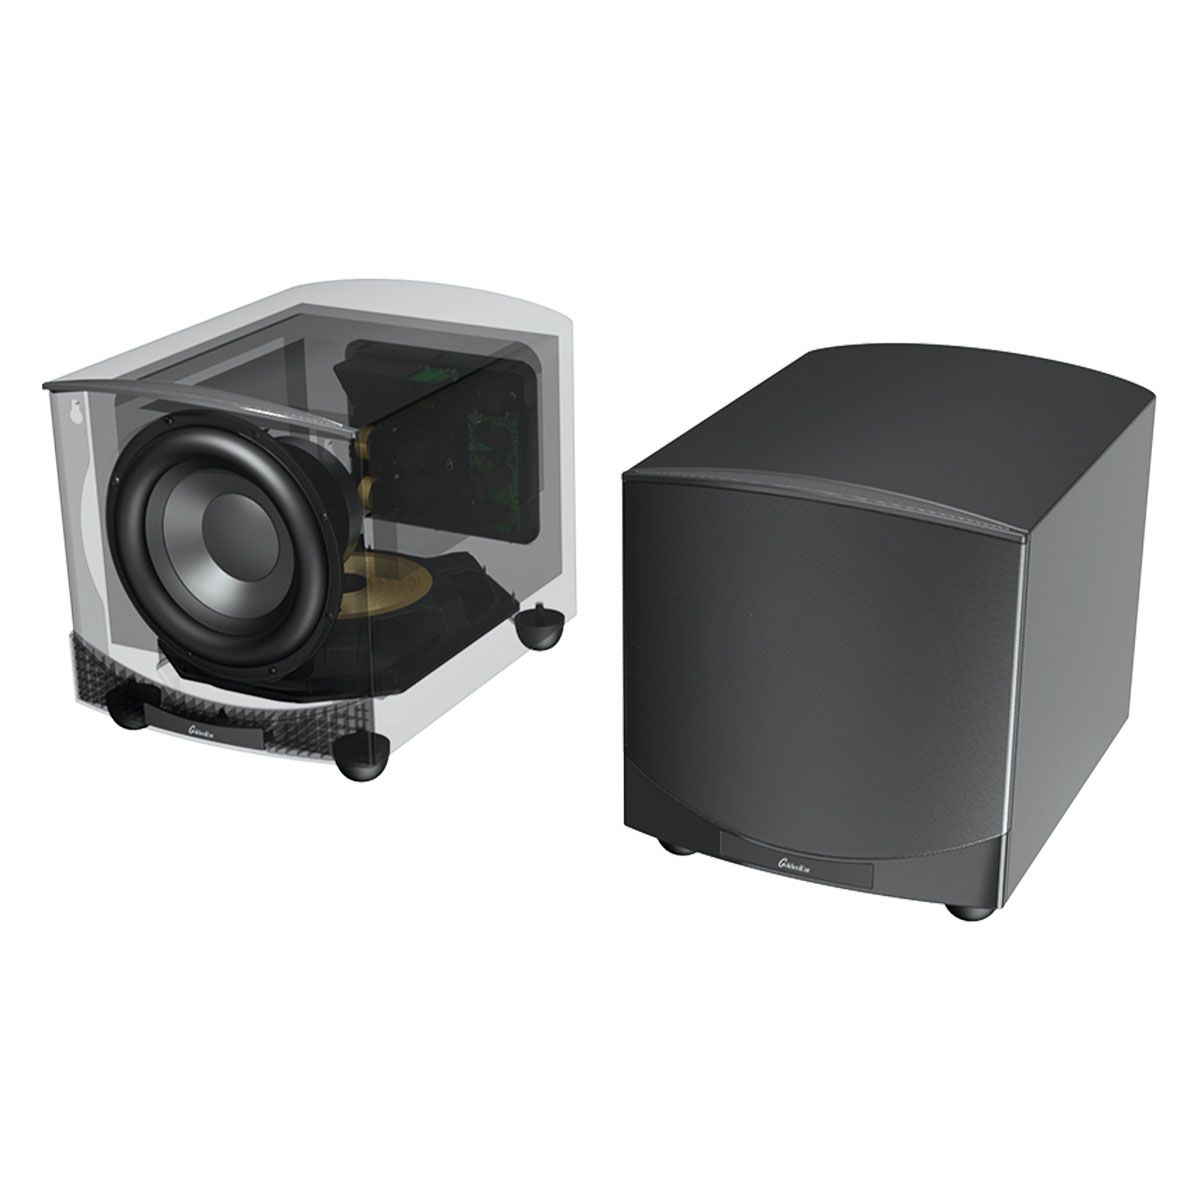 GoldenEar ForceField 40 - 10” Compact Subwoofer - Black - transparent view